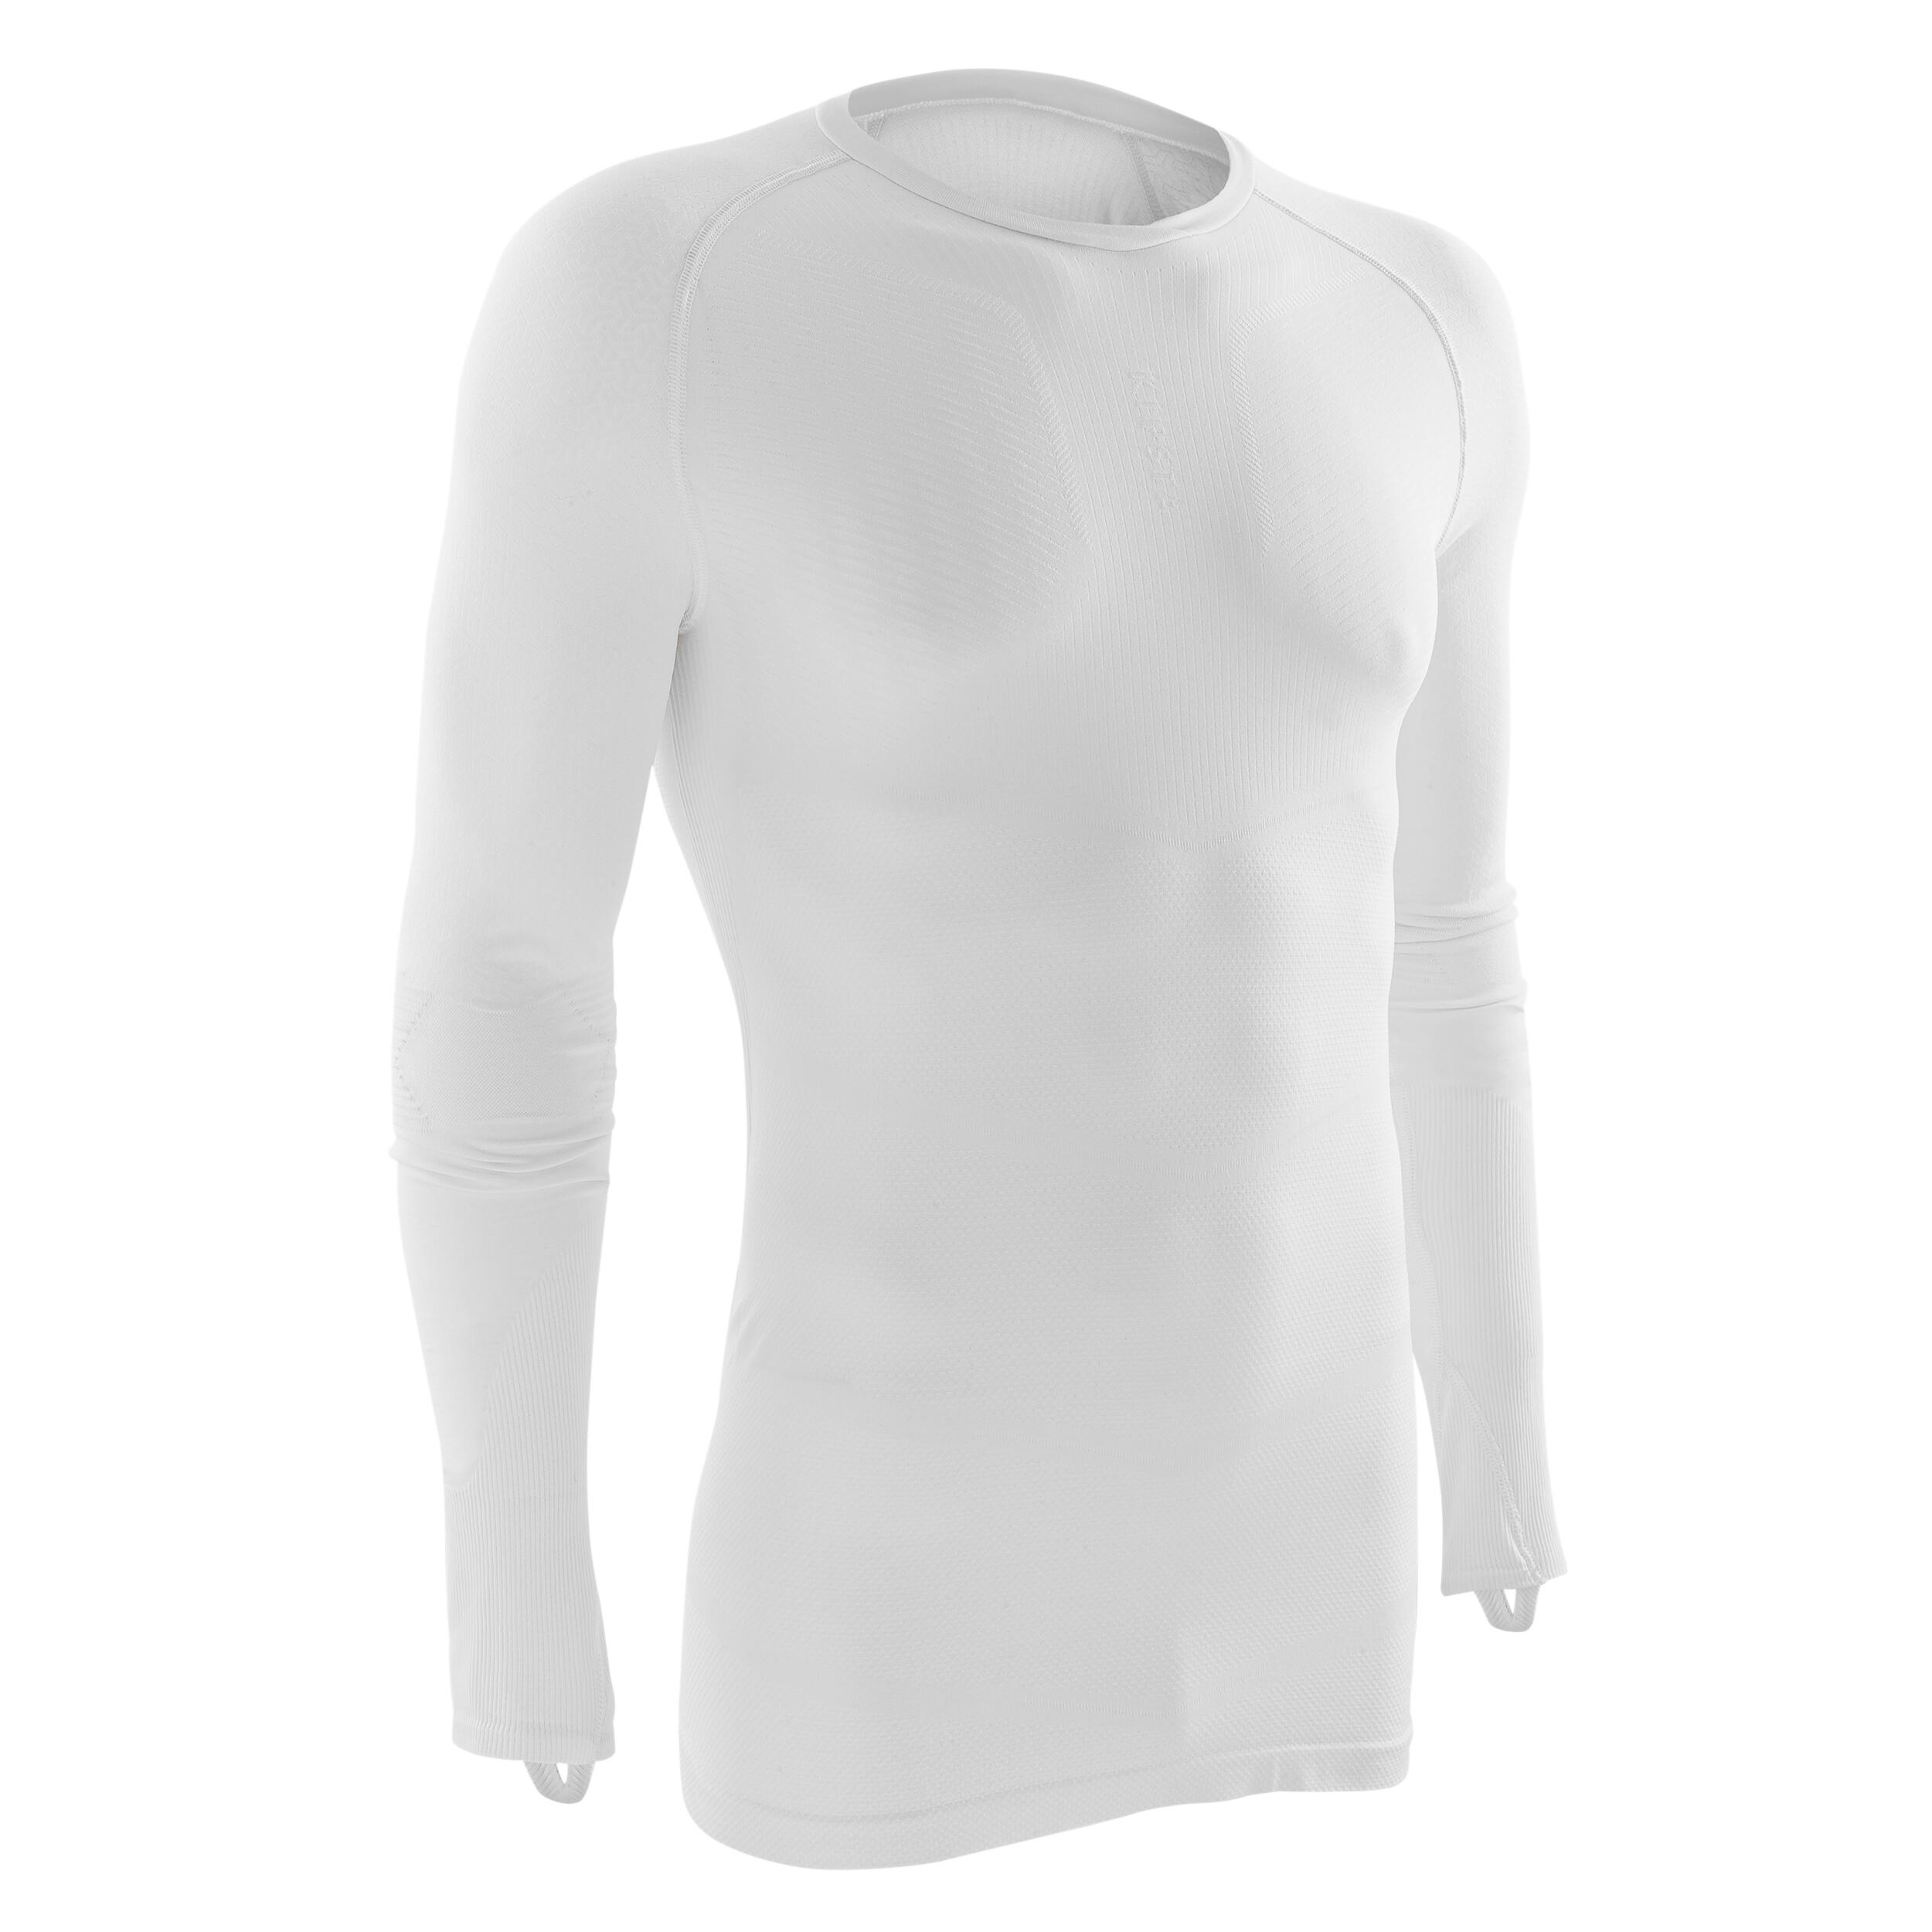 LS Thermal Base Layer Top - Keepdry 500 White - Snow white, Iced coffee ...